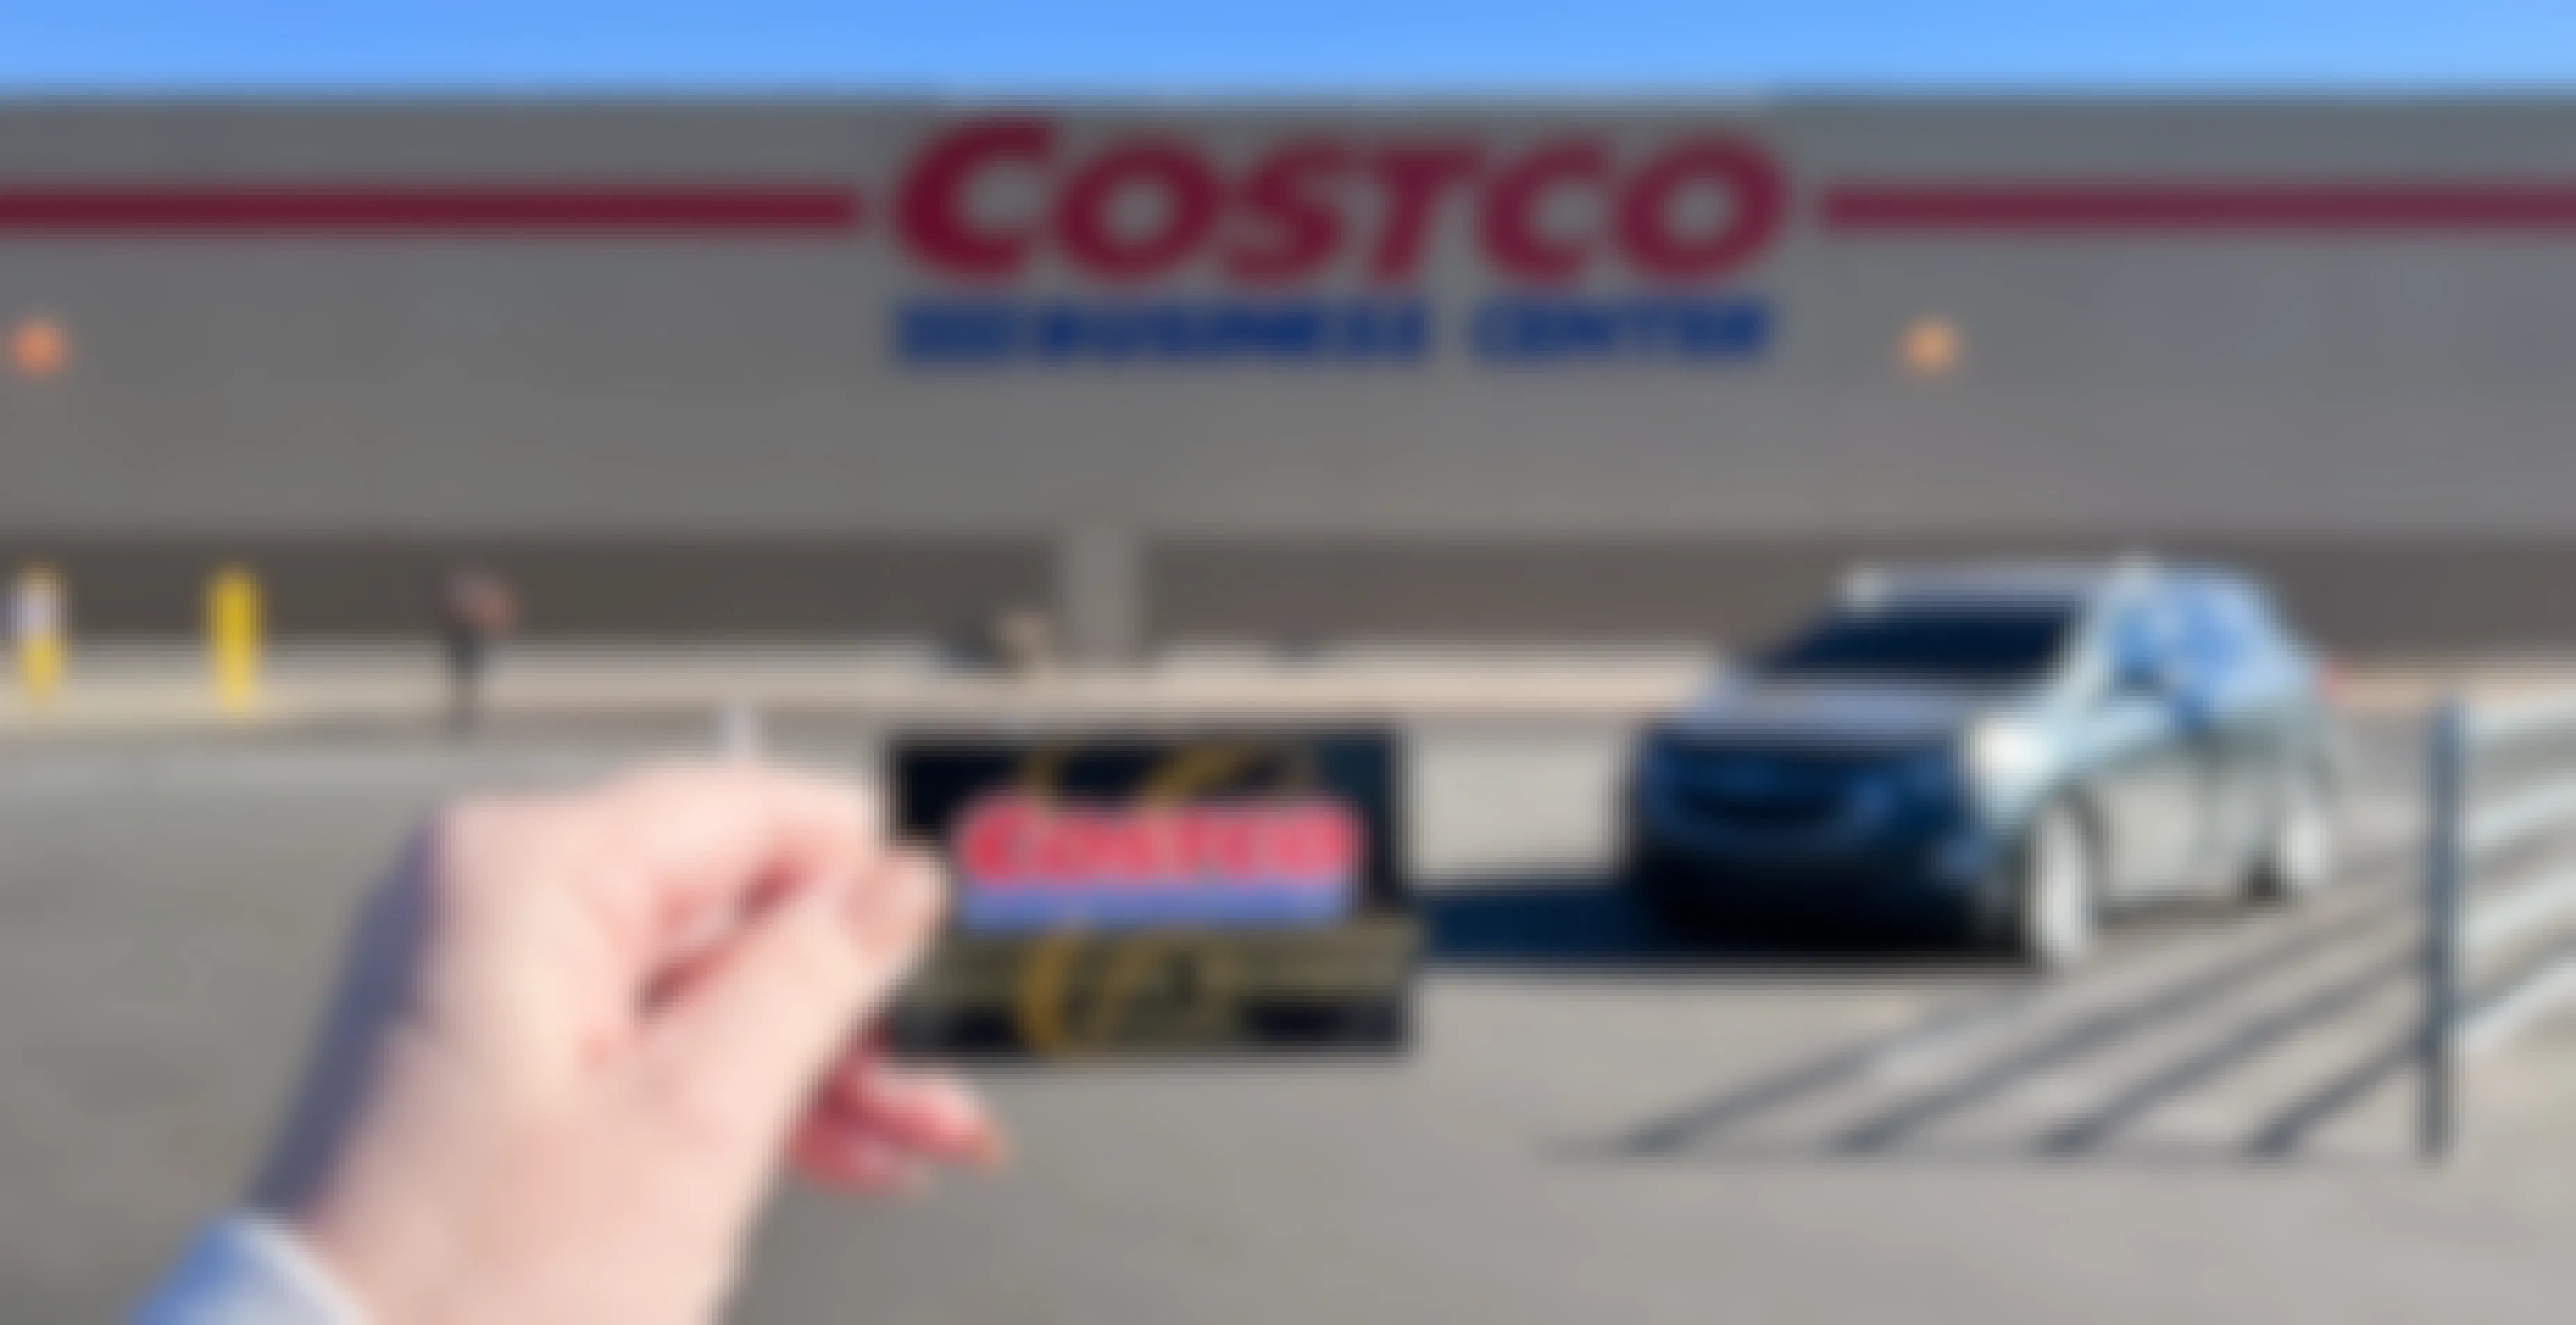 Costco Business Center: Locations, Who Can Shop There & What to Buy